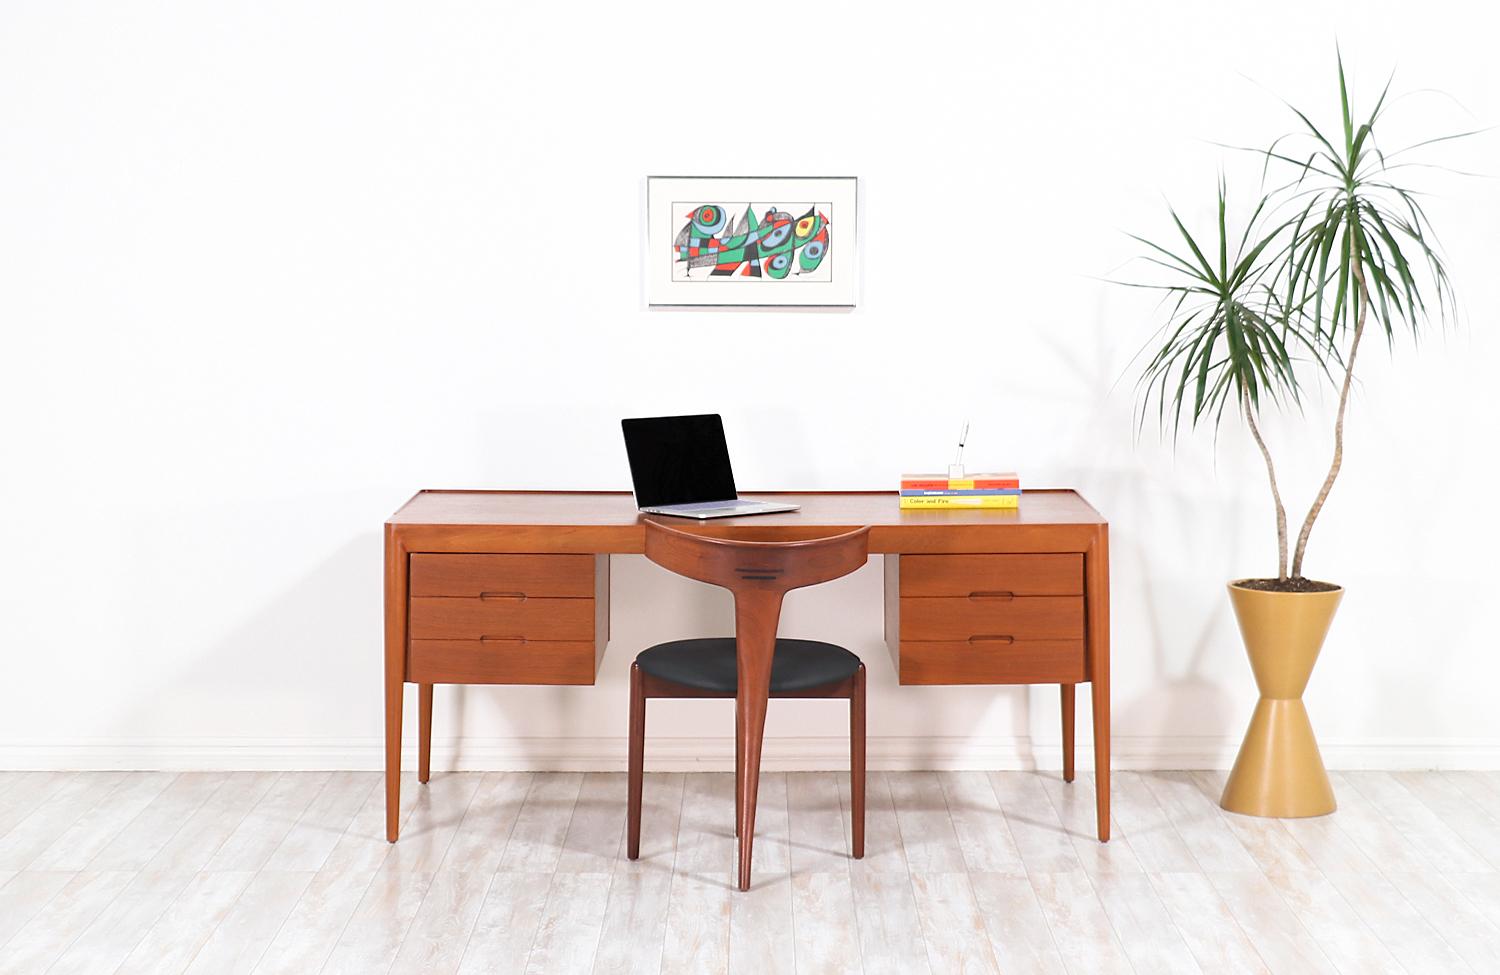 Danish Modern executive desk designed by Erik Riisager Hansen and manufactured by Haslev Møbelsnedkeri in Denmark, circa 1950s. This sleek design features a teak wood case with tall spindle legs and six front drawers creating an eye-catching profile